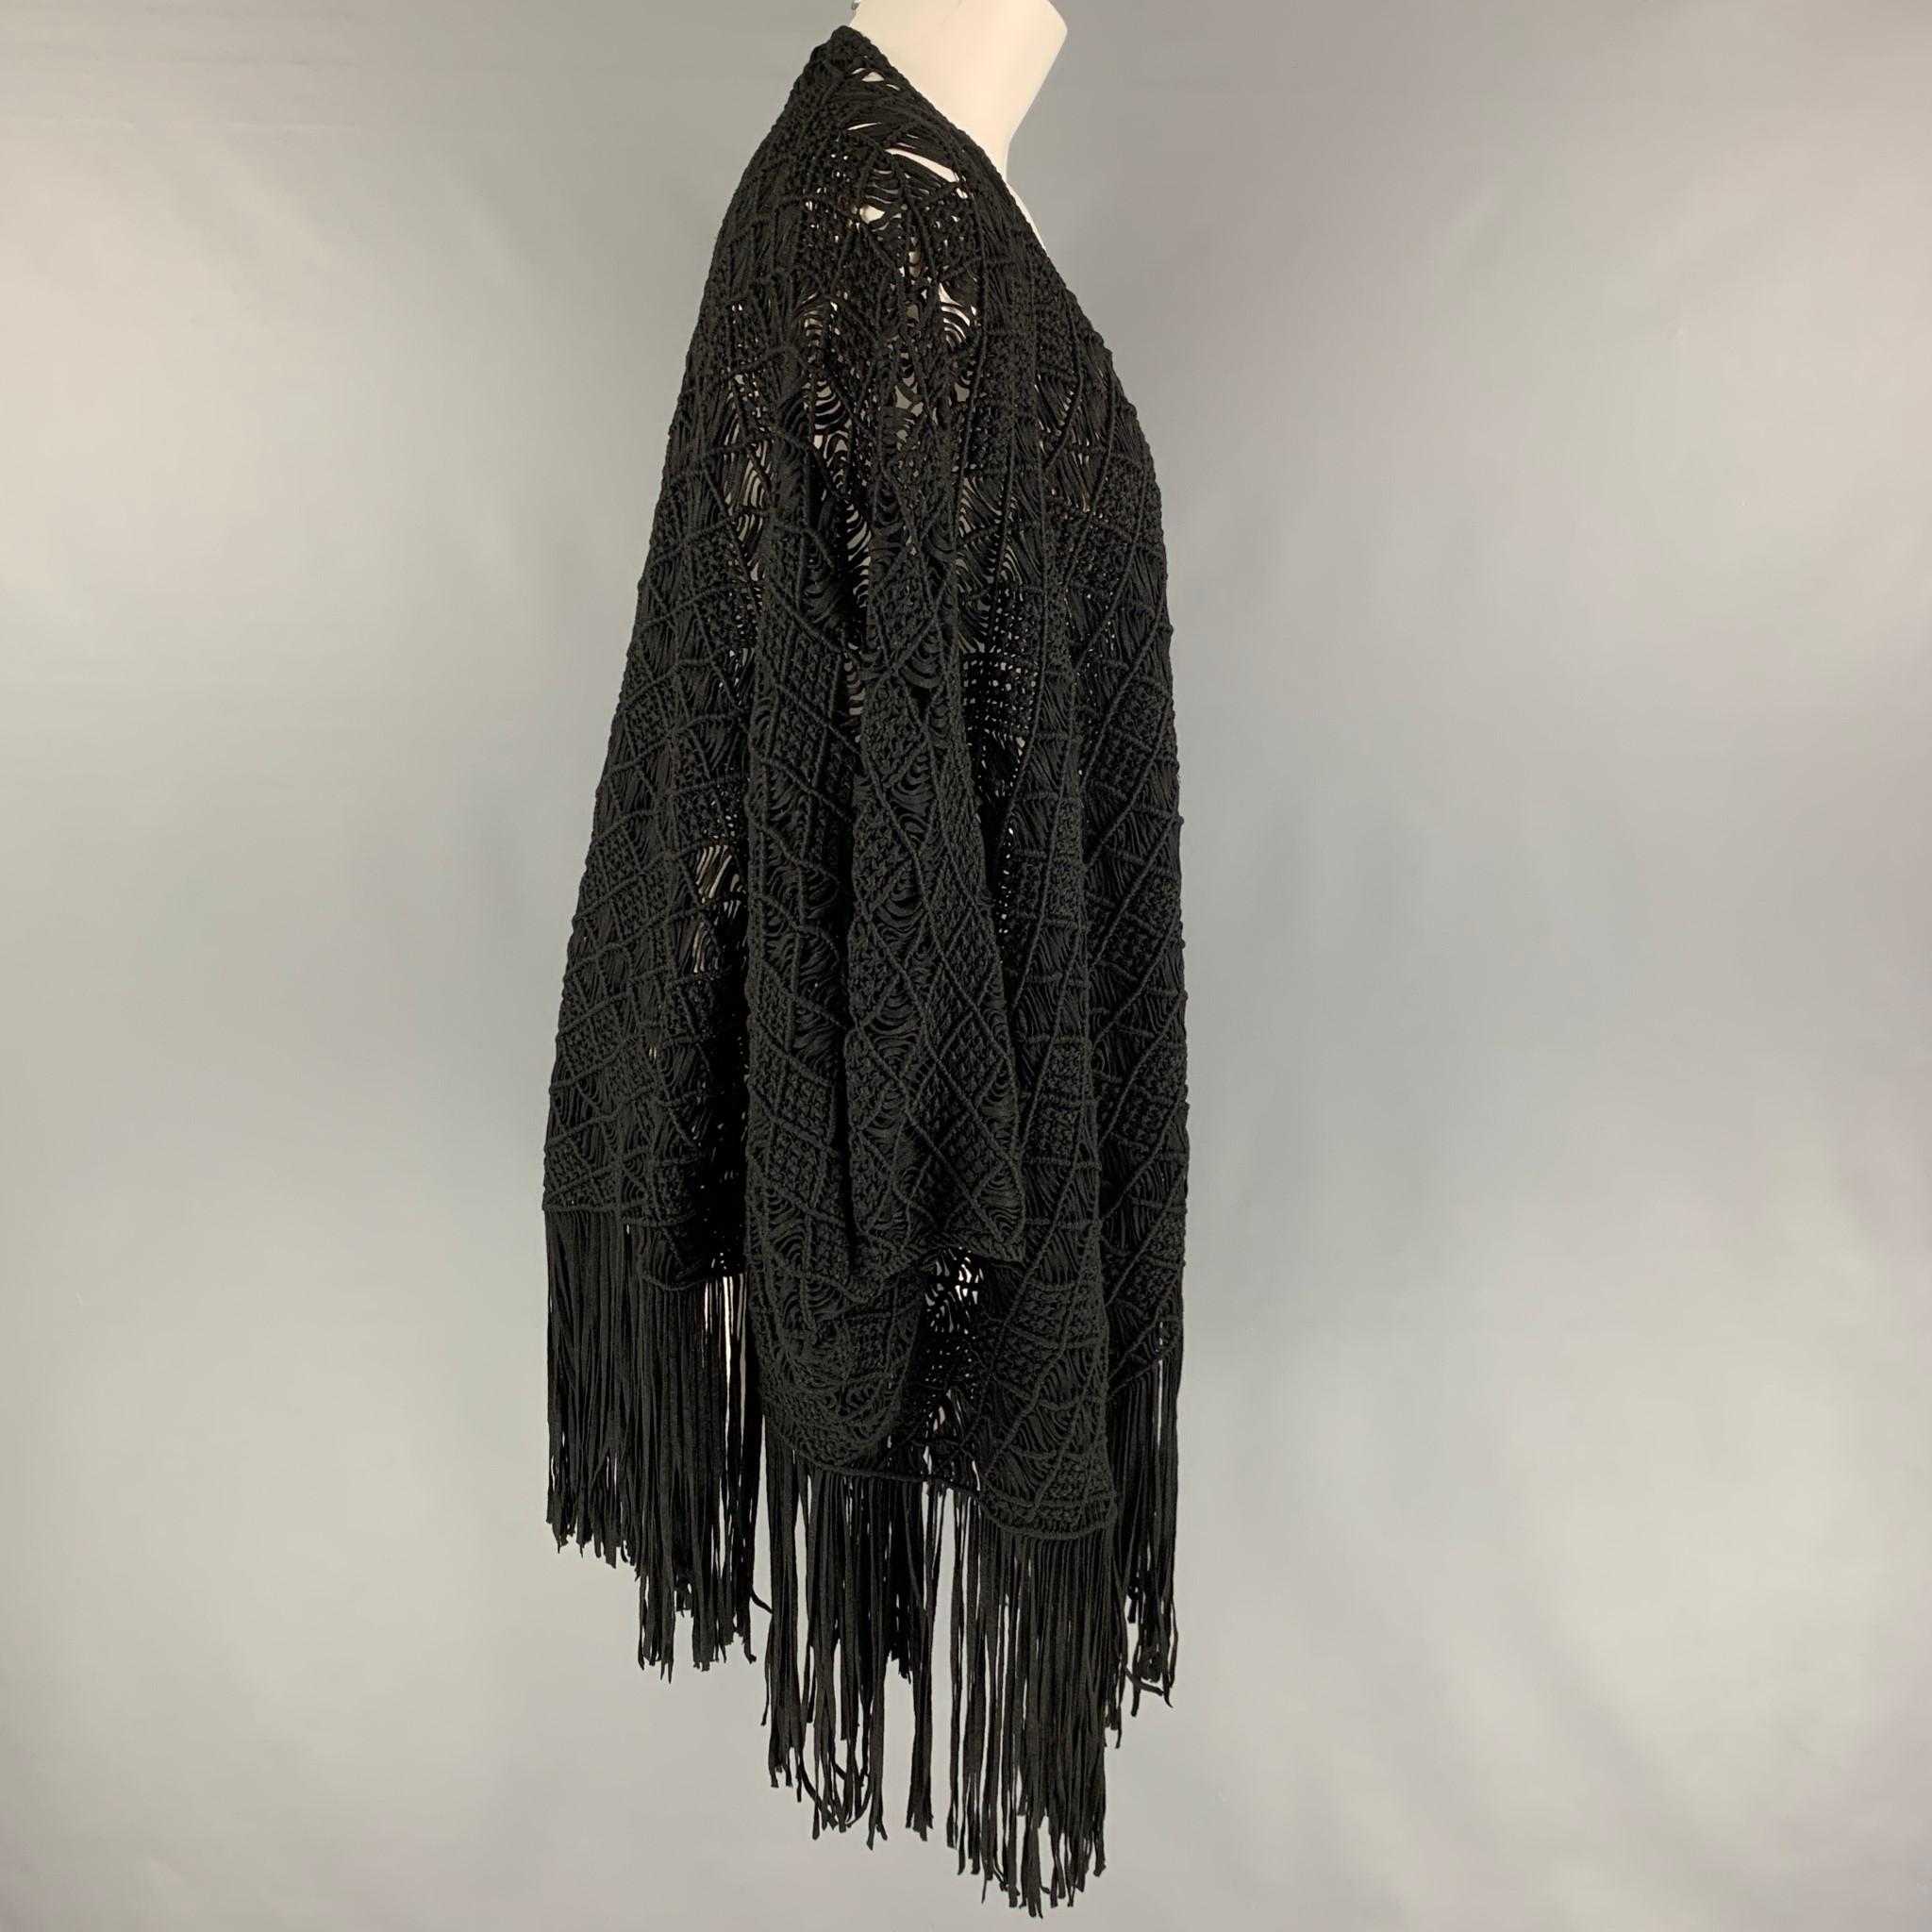 RALPH LAUREN 'Black Label' cape comes in a black knitted viscose / polyester featuring a fringe trim and a open front. 

Very Good Pre-Owned Condition.
Marked: M/L

Measurements:

Shoulder: 57 in.
Length: 37 in. 